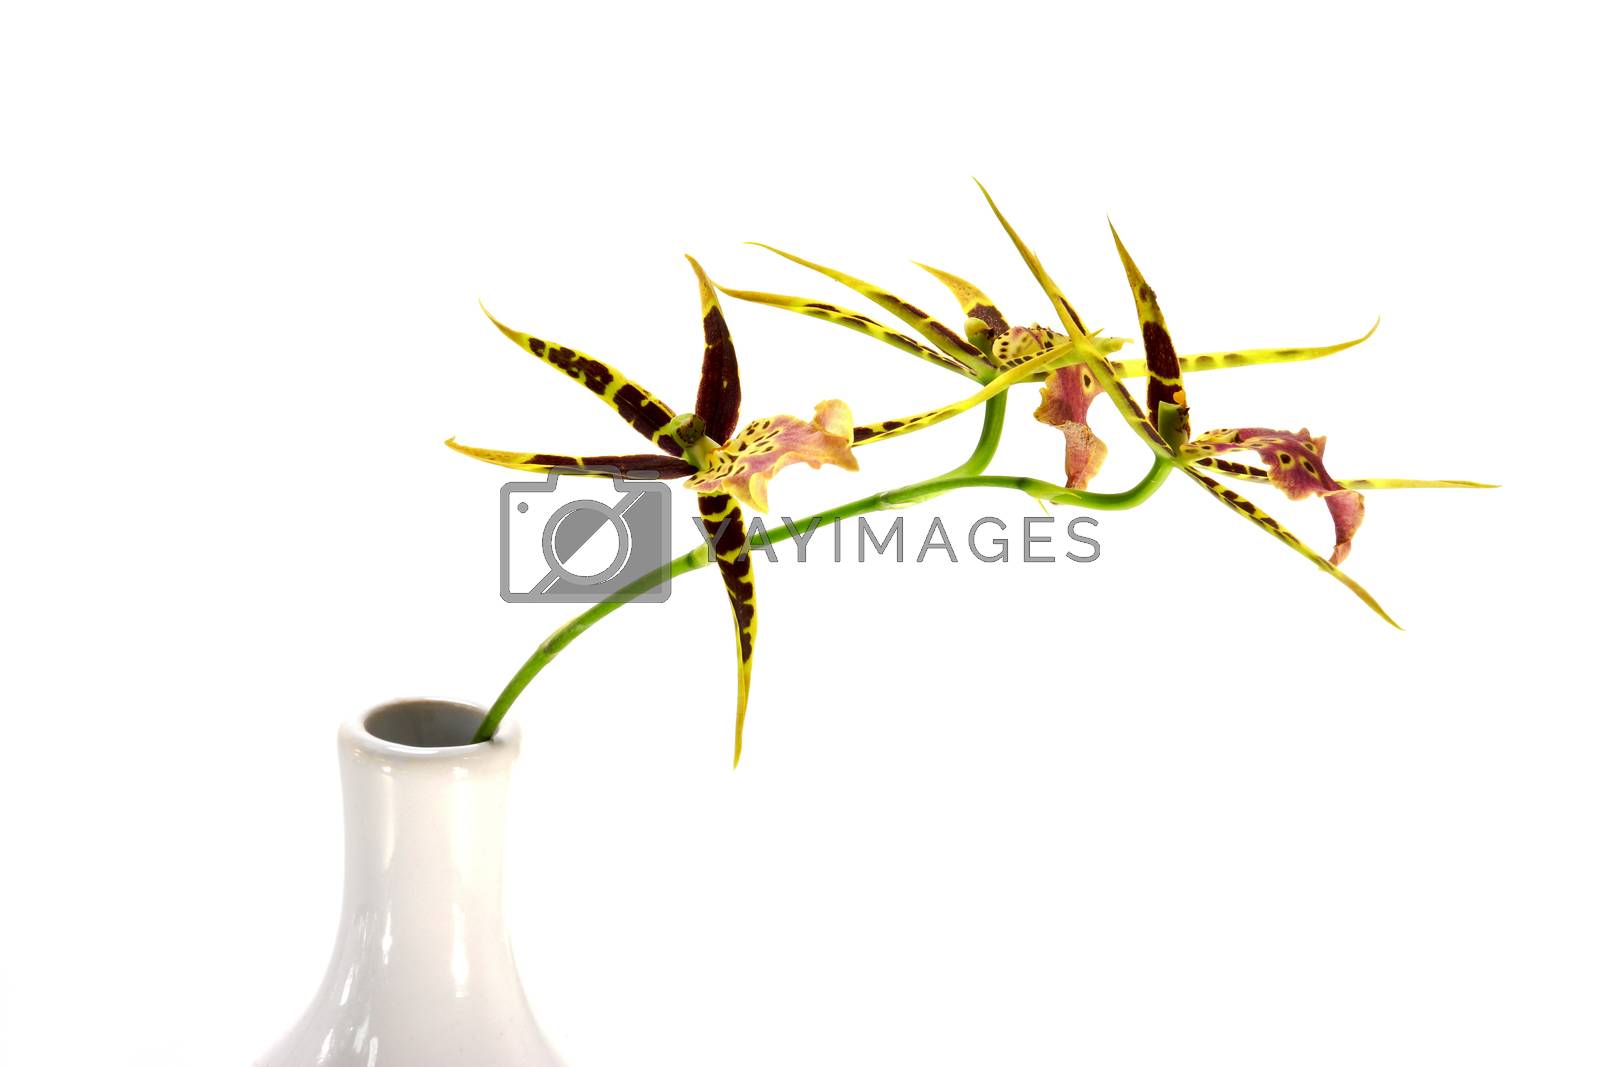 Royalty free image of Brassia Orchid isolated on white background. by Noppharat_th